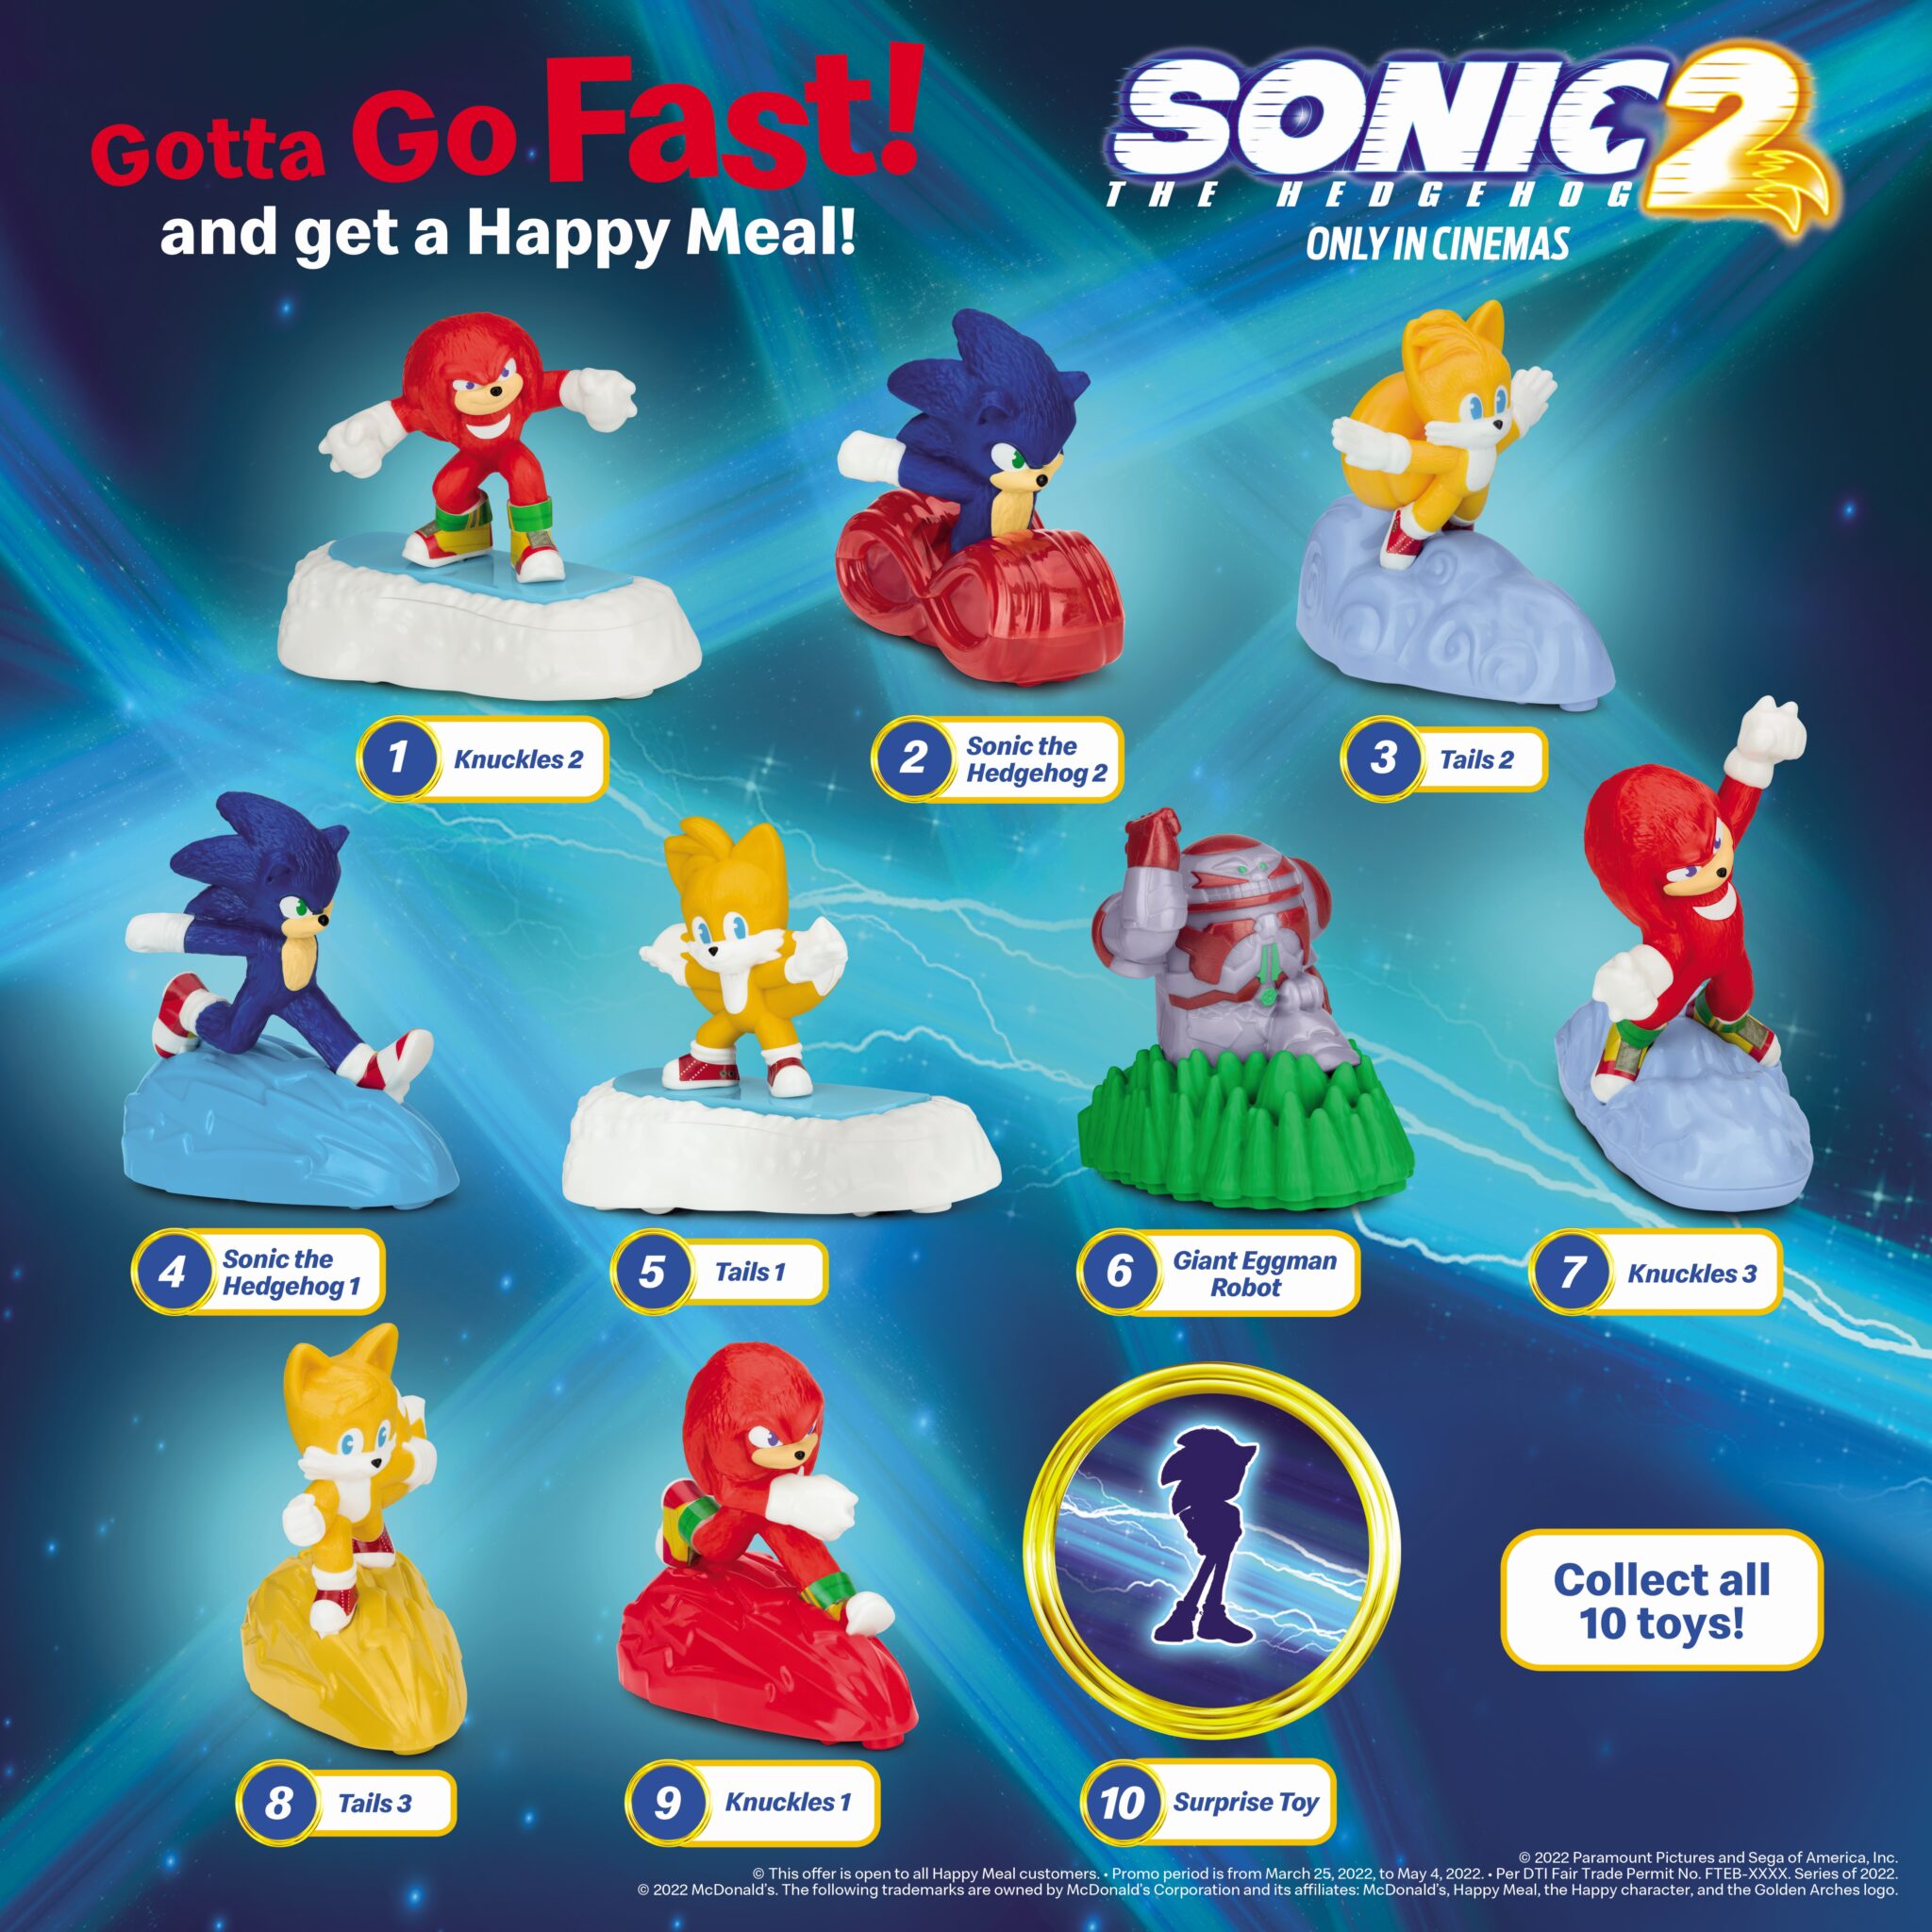 Introducing The Sonic 2 Toy Collectibles 2048x2048 